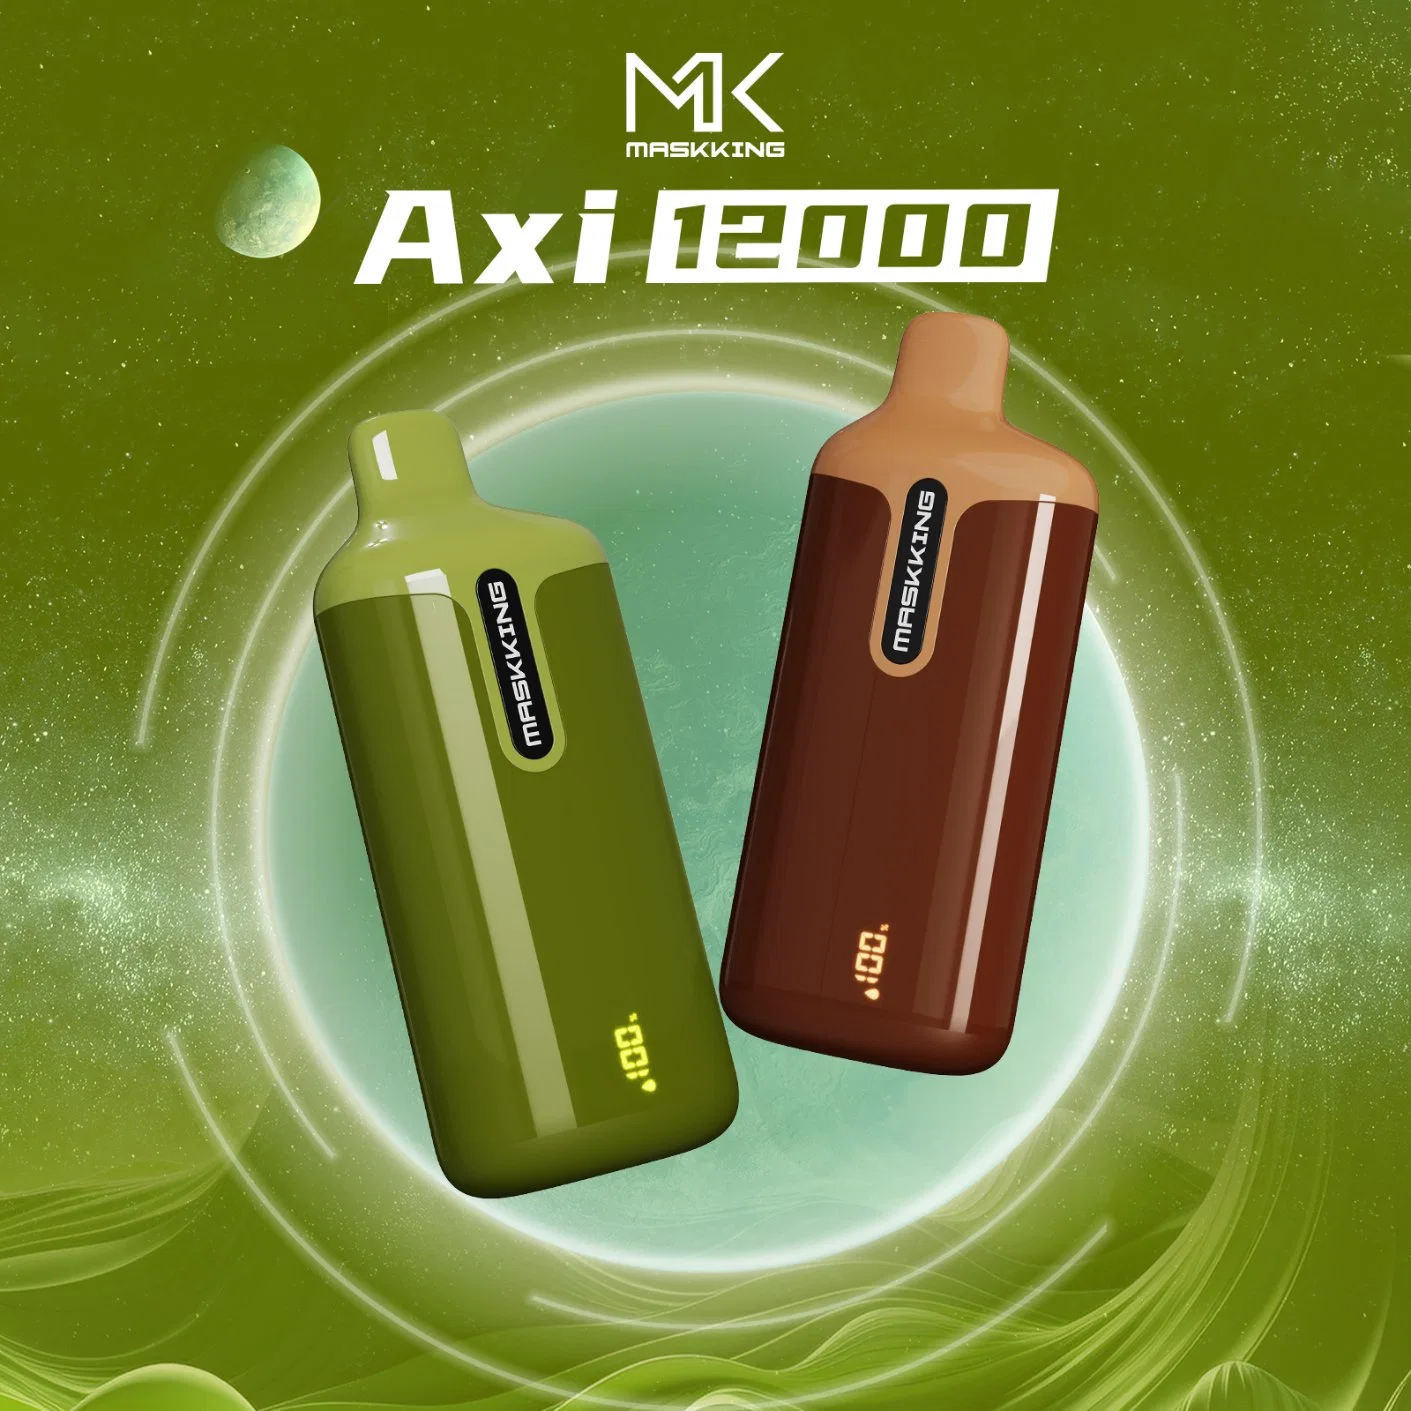 Maskking Axi 12000 Puffs Vape Pen with Display Screen Disposable/Chargeable Electronic Cigarette Atomizer Pod 22ml E-Juice